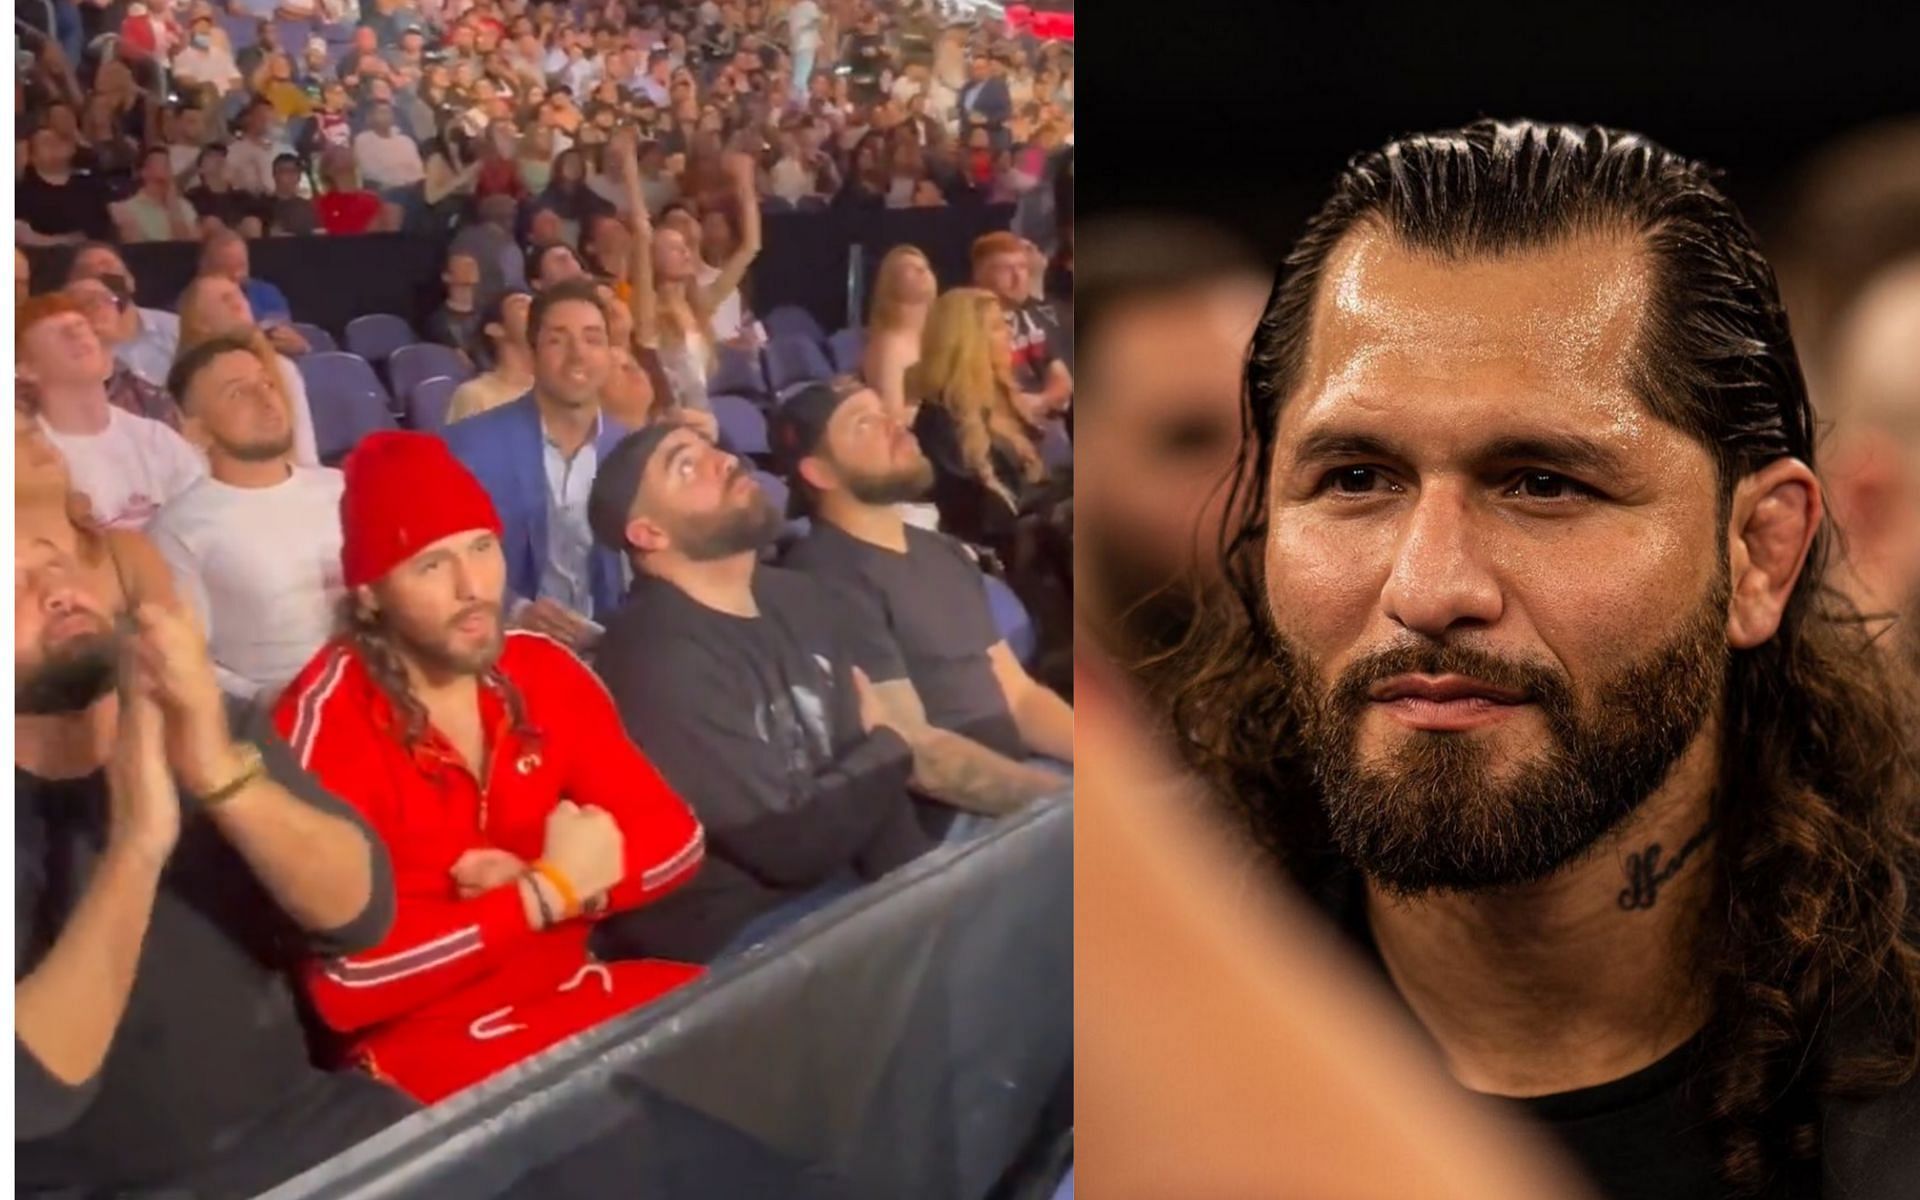 Jorge Masvidal received a massive cheer from the public at the Jake Paul vs. Tyron Woodley event [Credits: @gamebredfighter via Instagram]